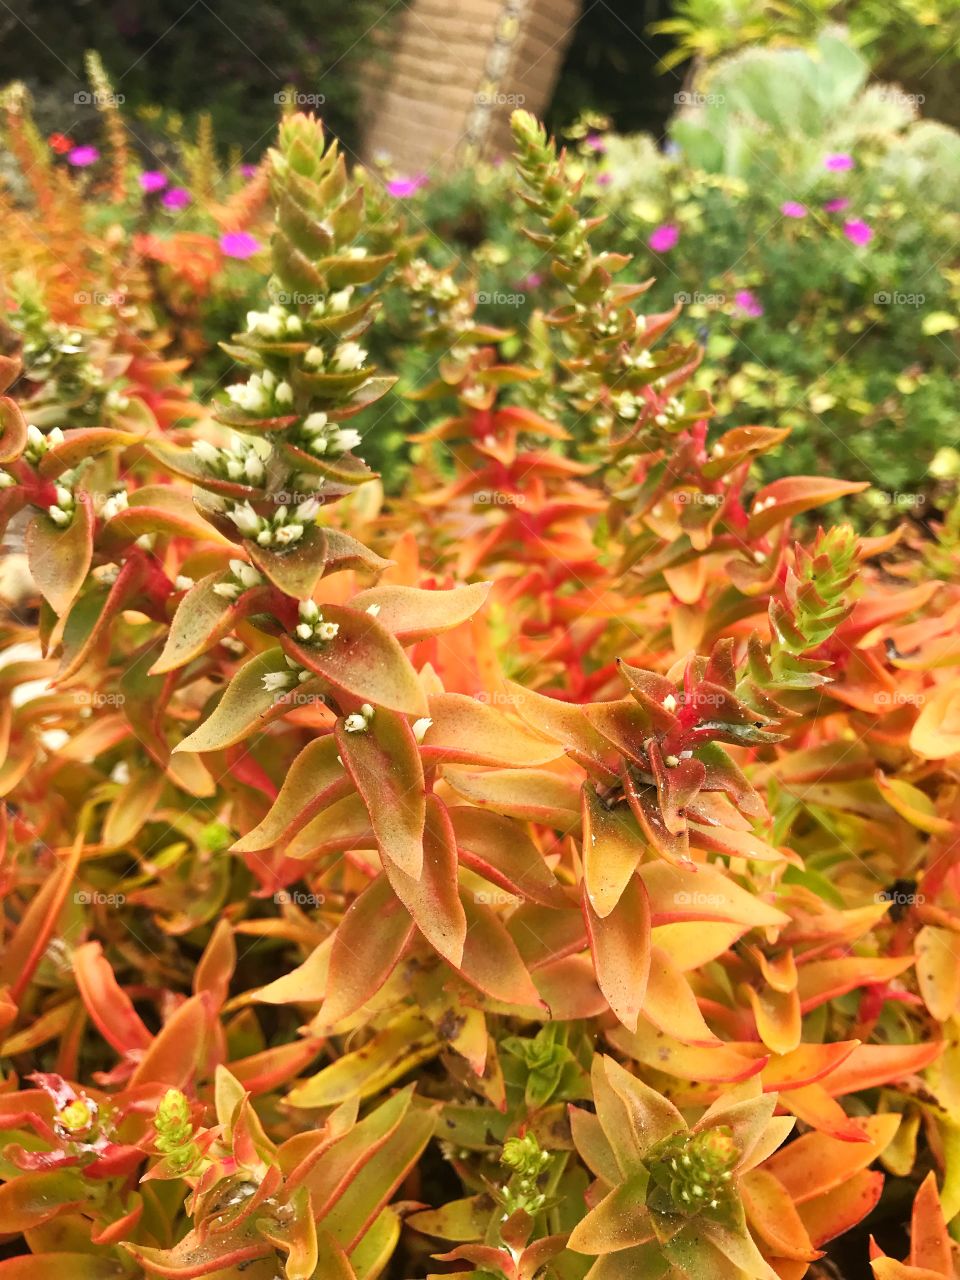 Fiery leafy plant with small, white flowers